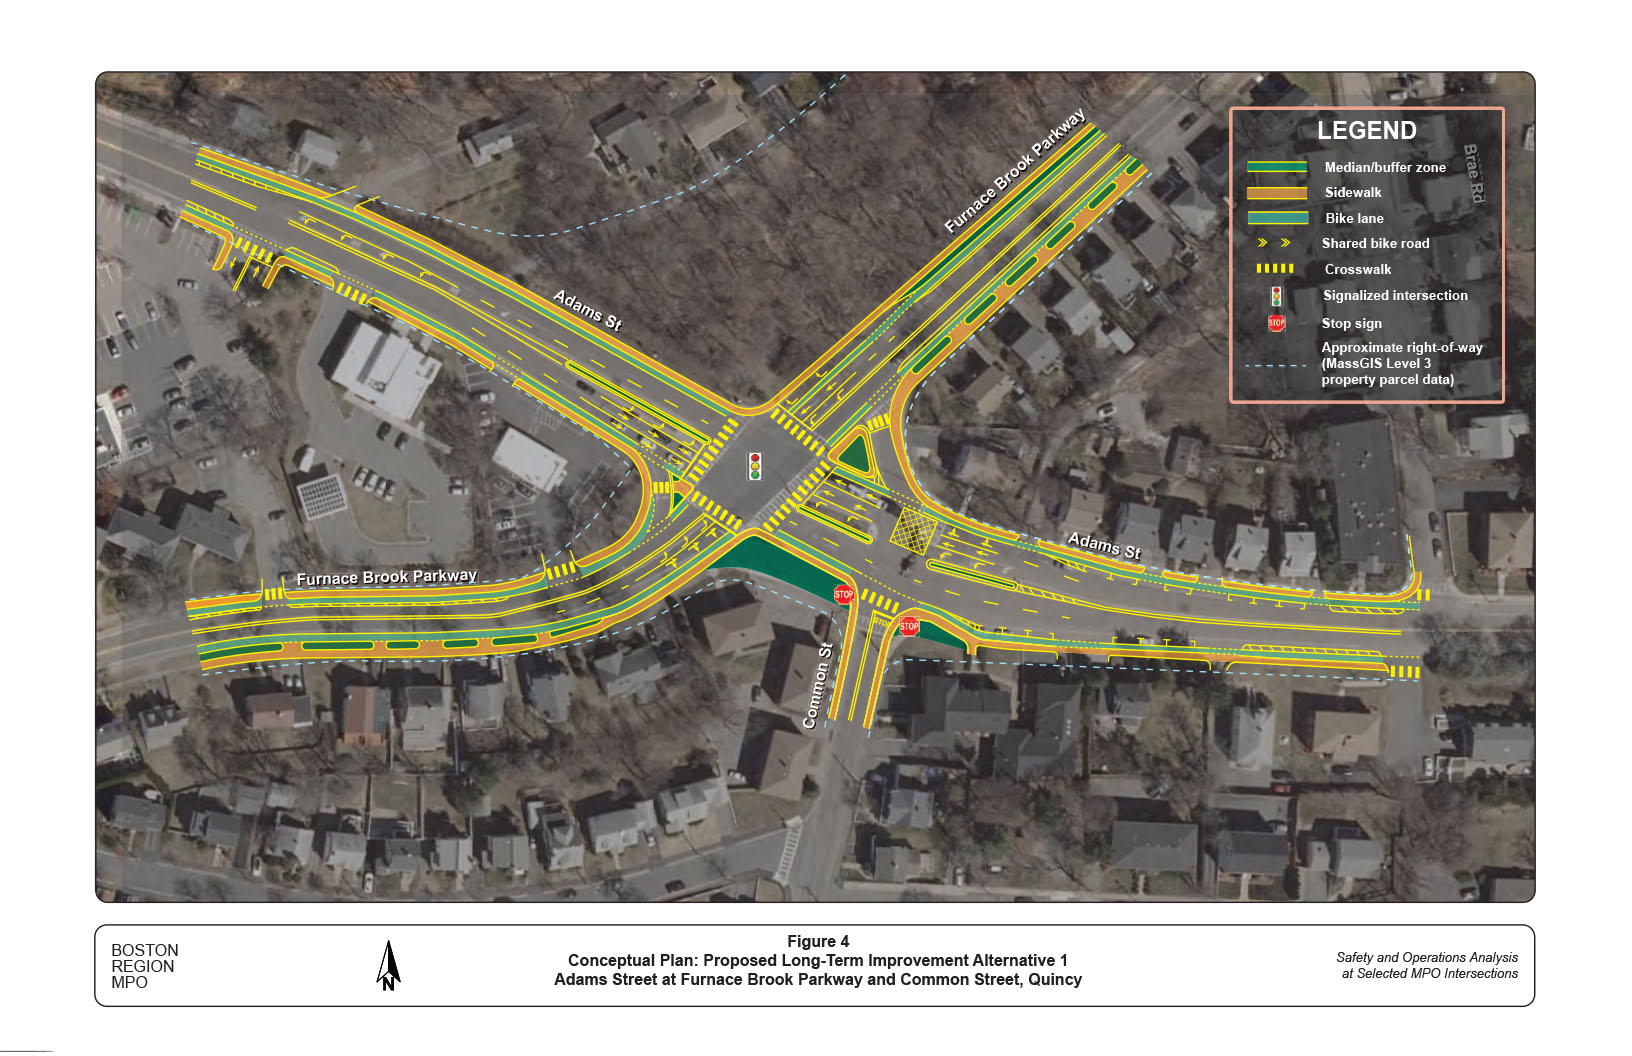 Figure 4: Proposed Long-Term Improvement Alternative 1
This figure shows a conceptual plan view of the proposed roadway modifications in the long-term improvement Alternative 1.
